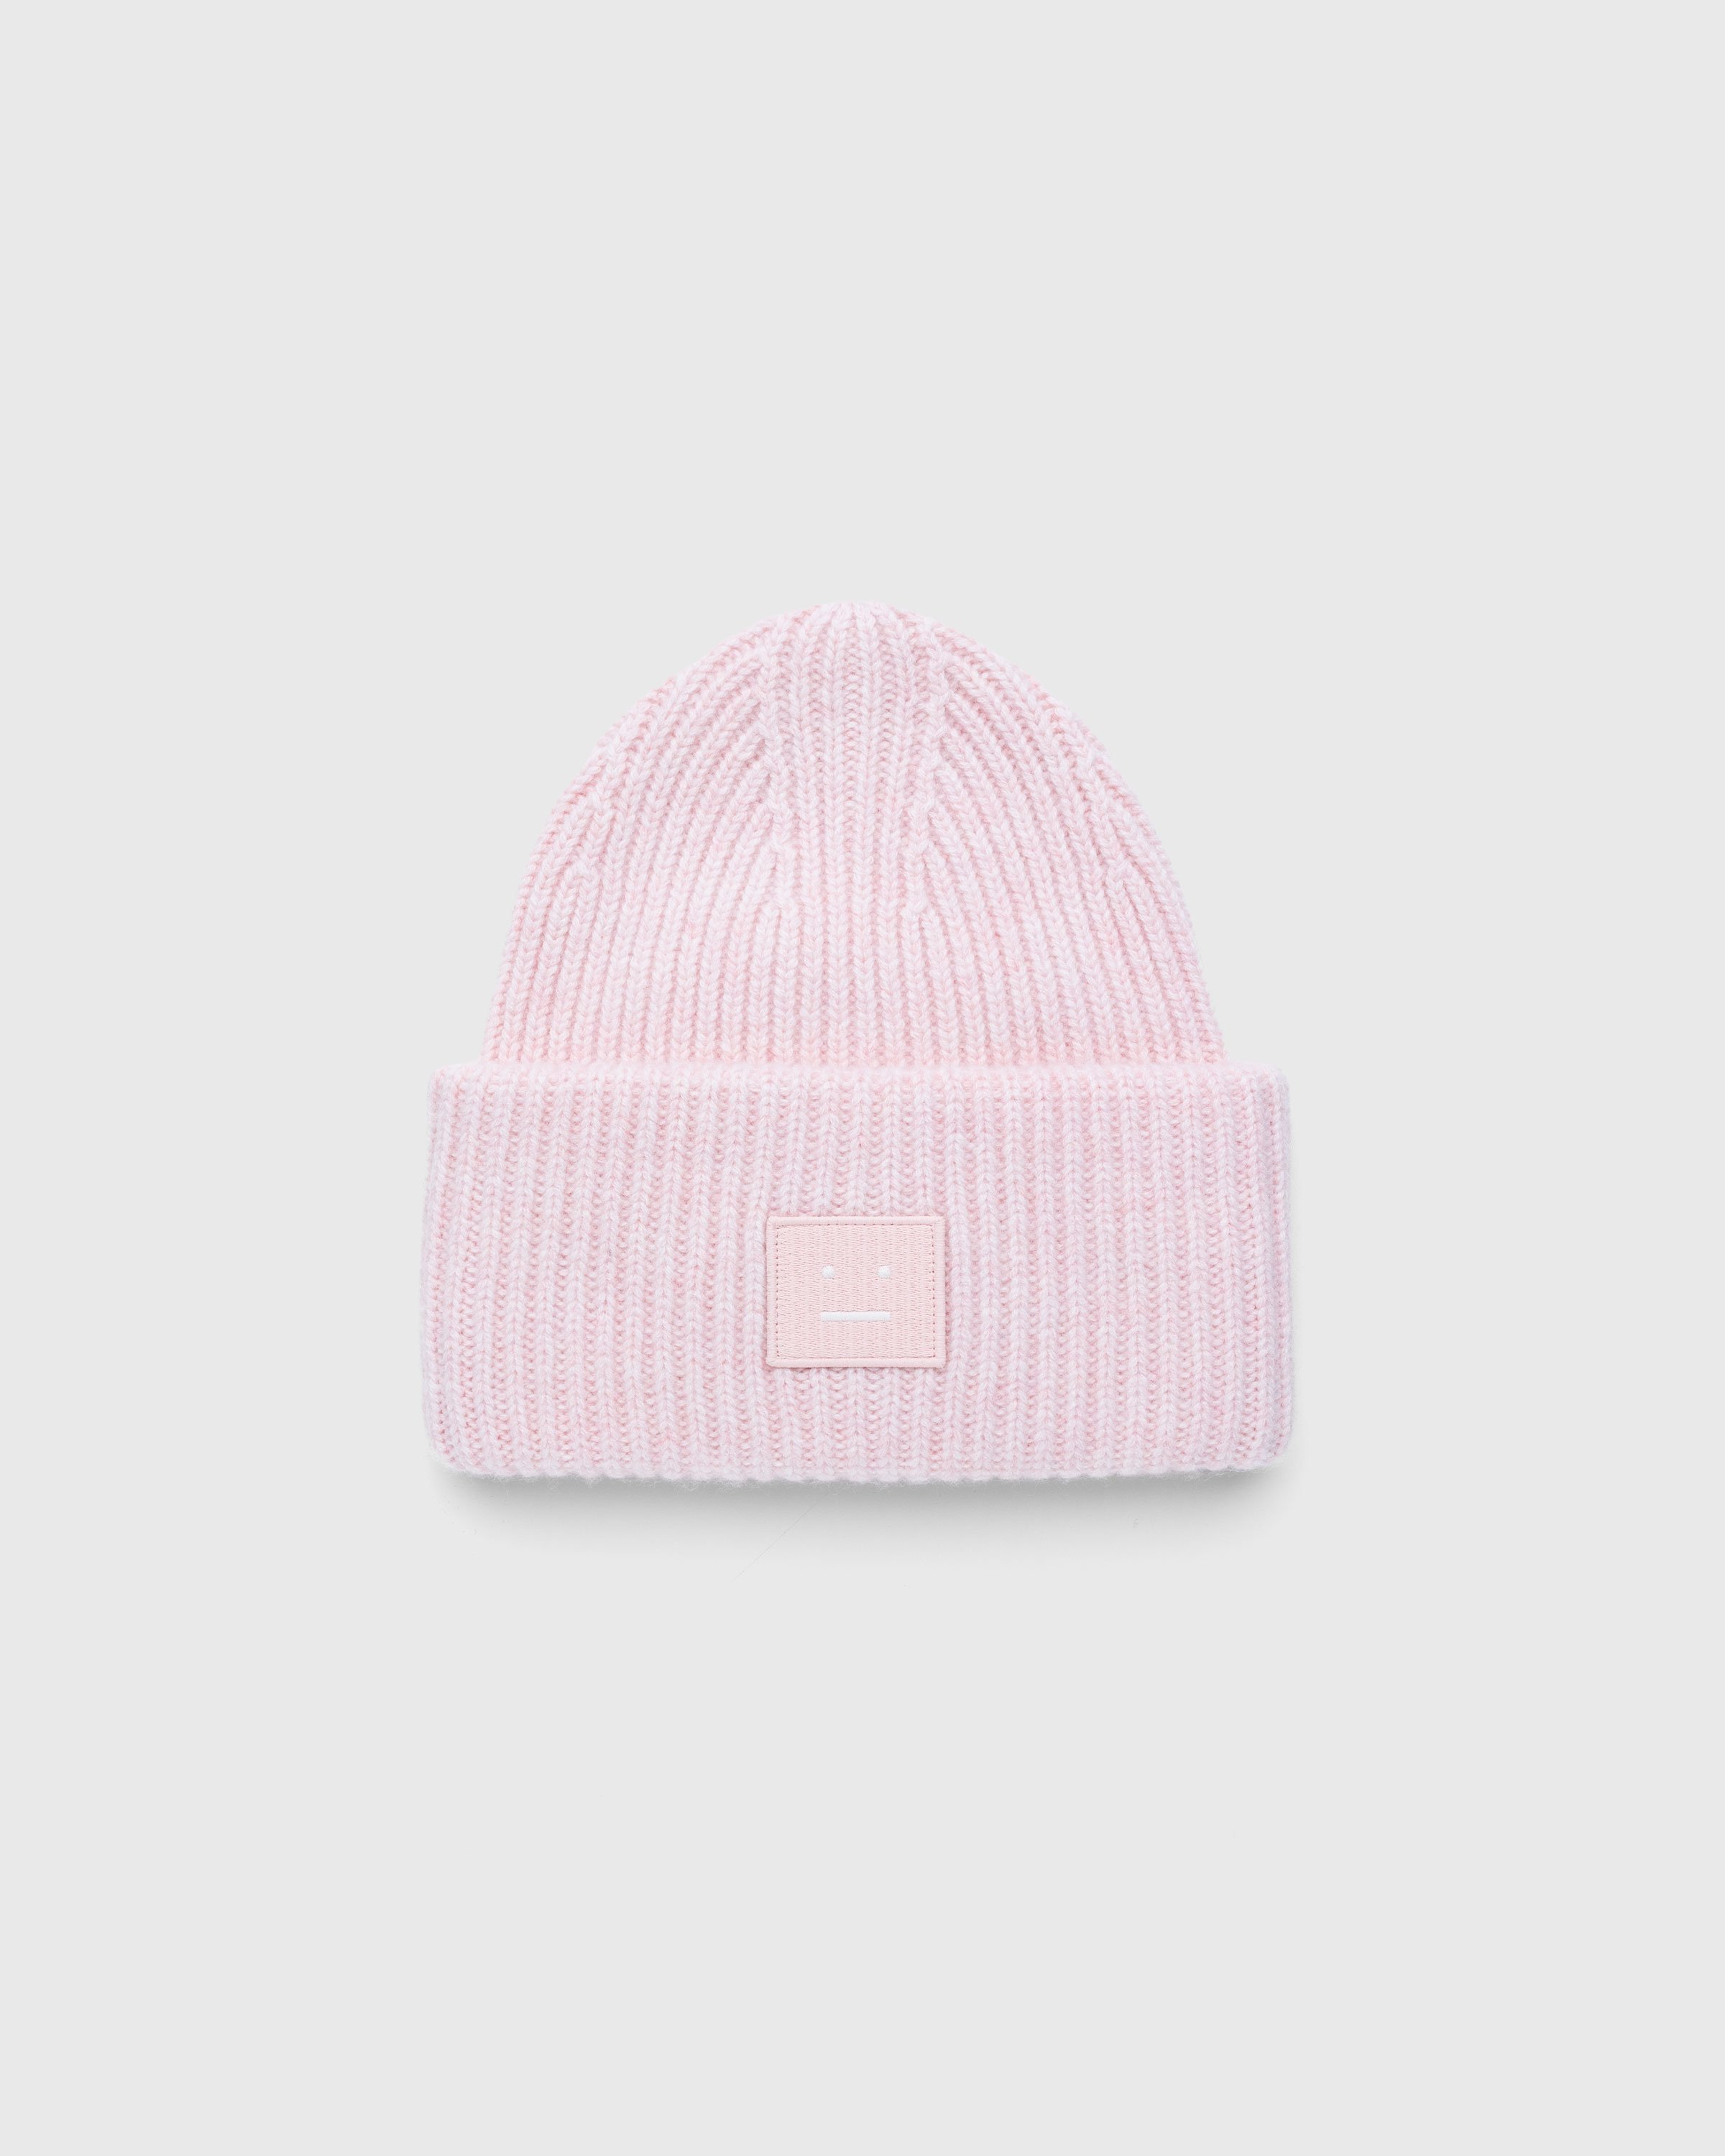 Acne Studios - Large Face Logo Beanie Pink - Accessories - Pink - Image 1